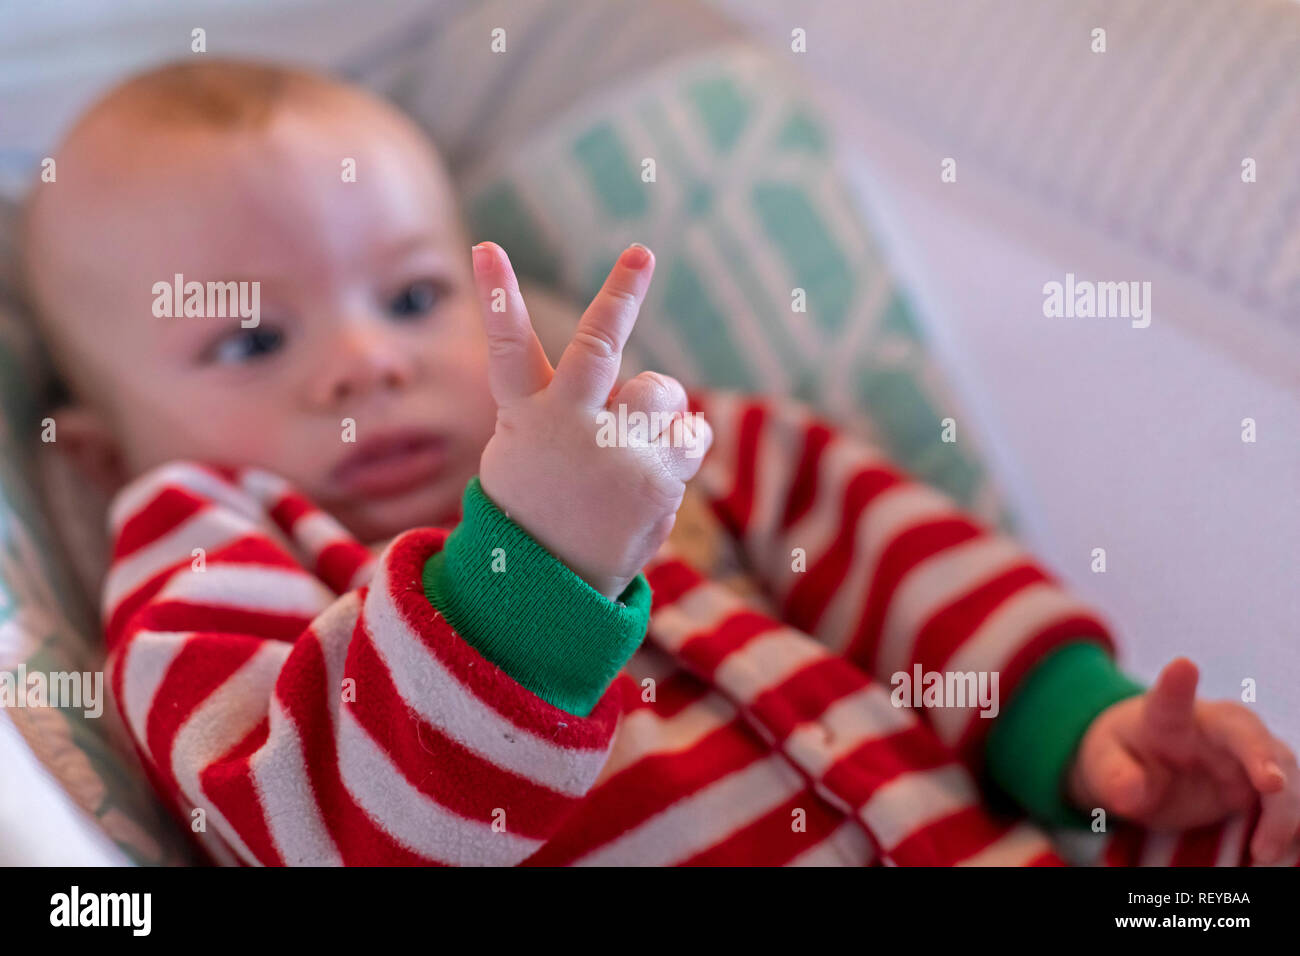 Denver, Colorado - Four-month-old Hendrix Hjermstad studies his fingers. Stock Photo